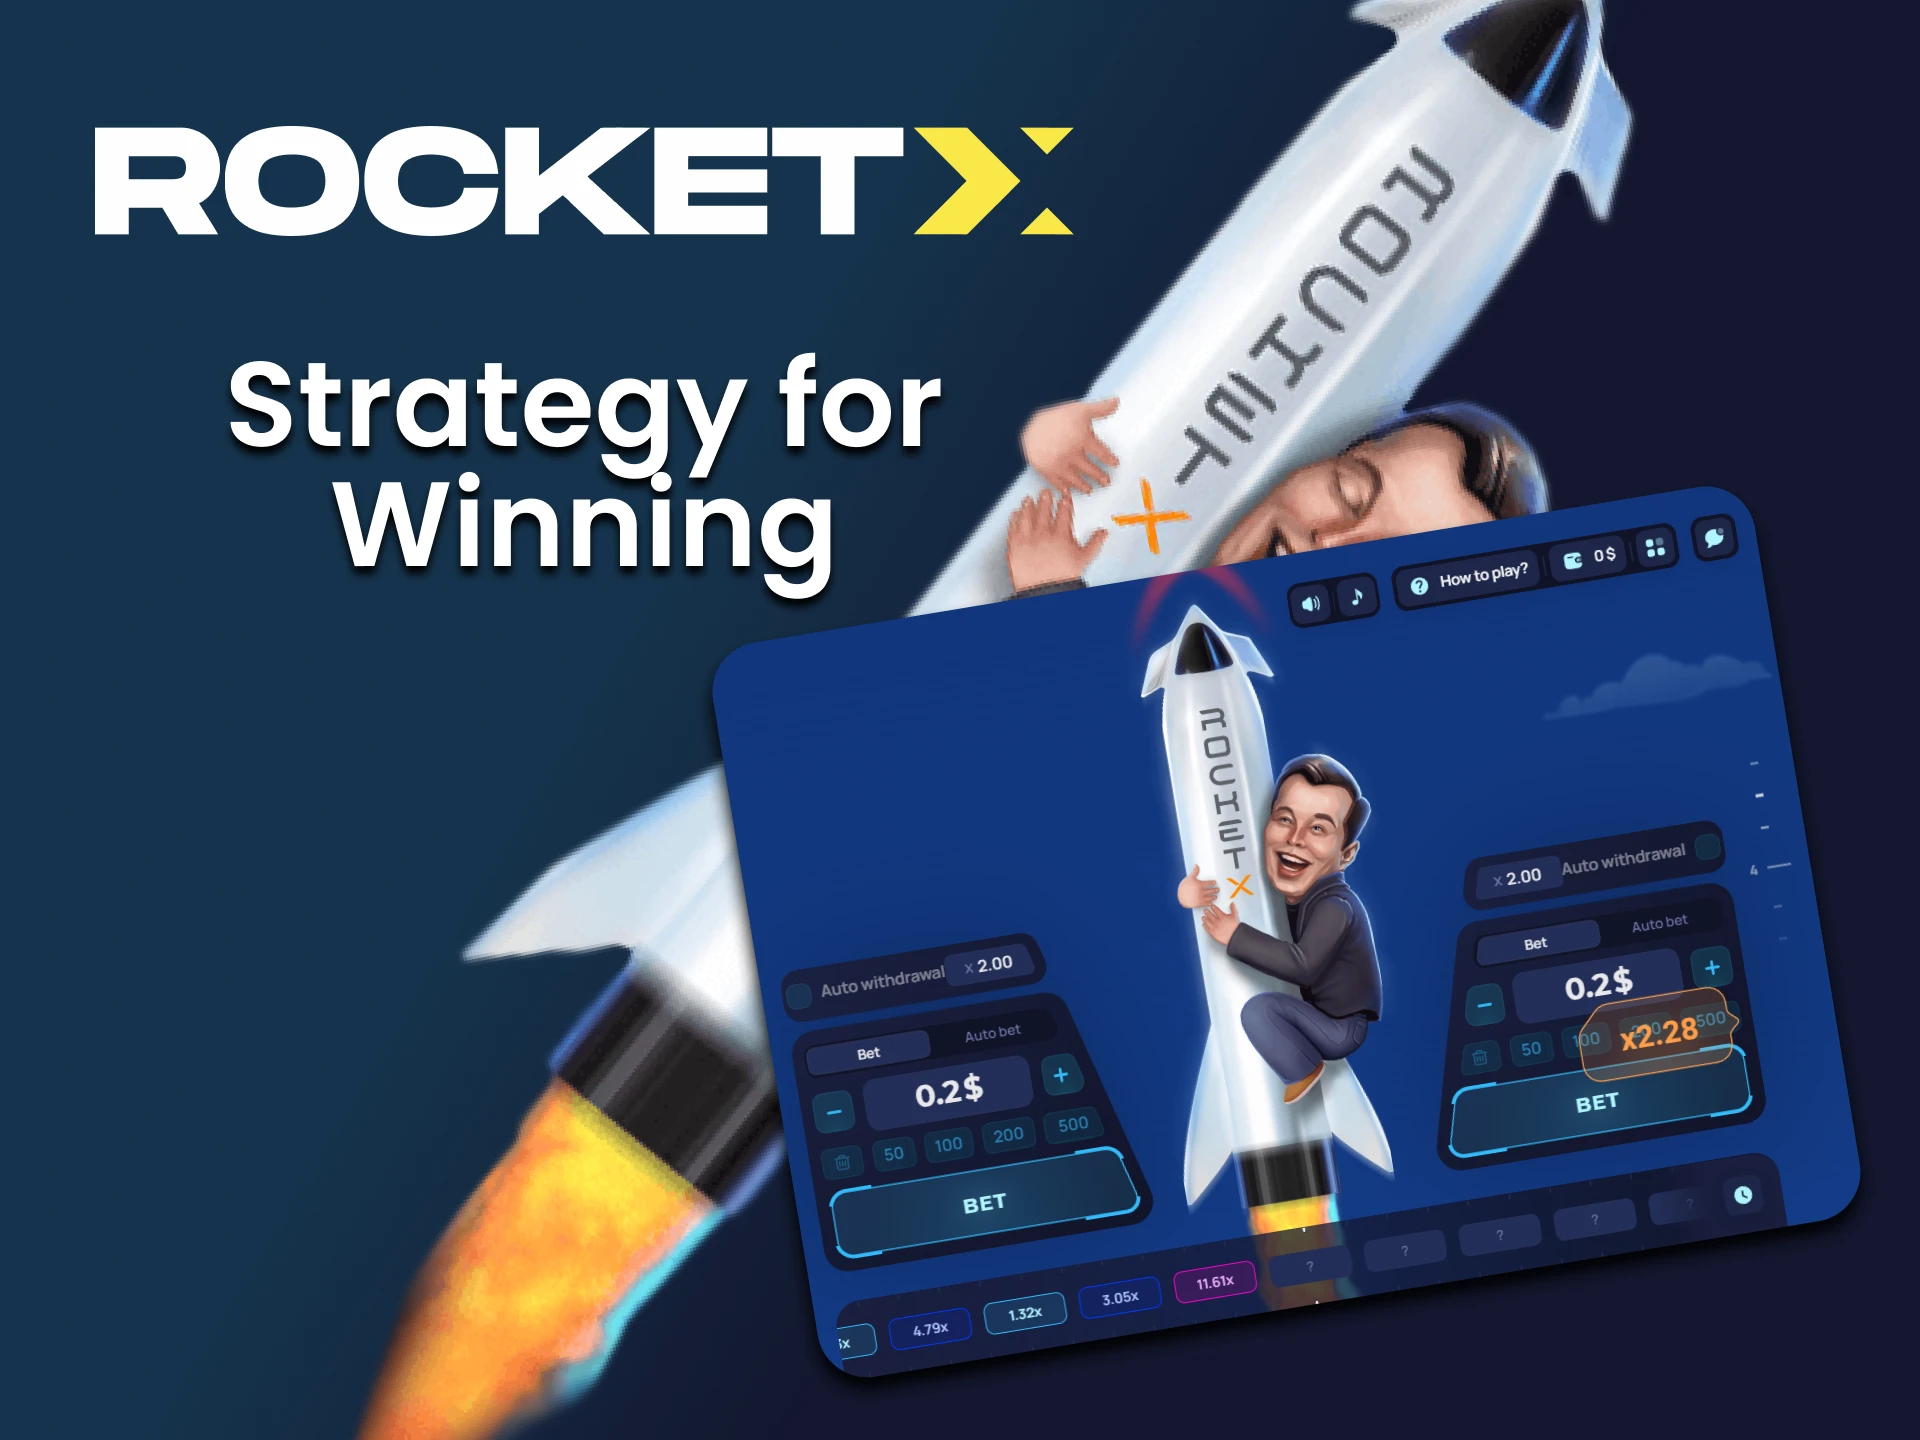 Choose the tactics that suit you in Rocket X.